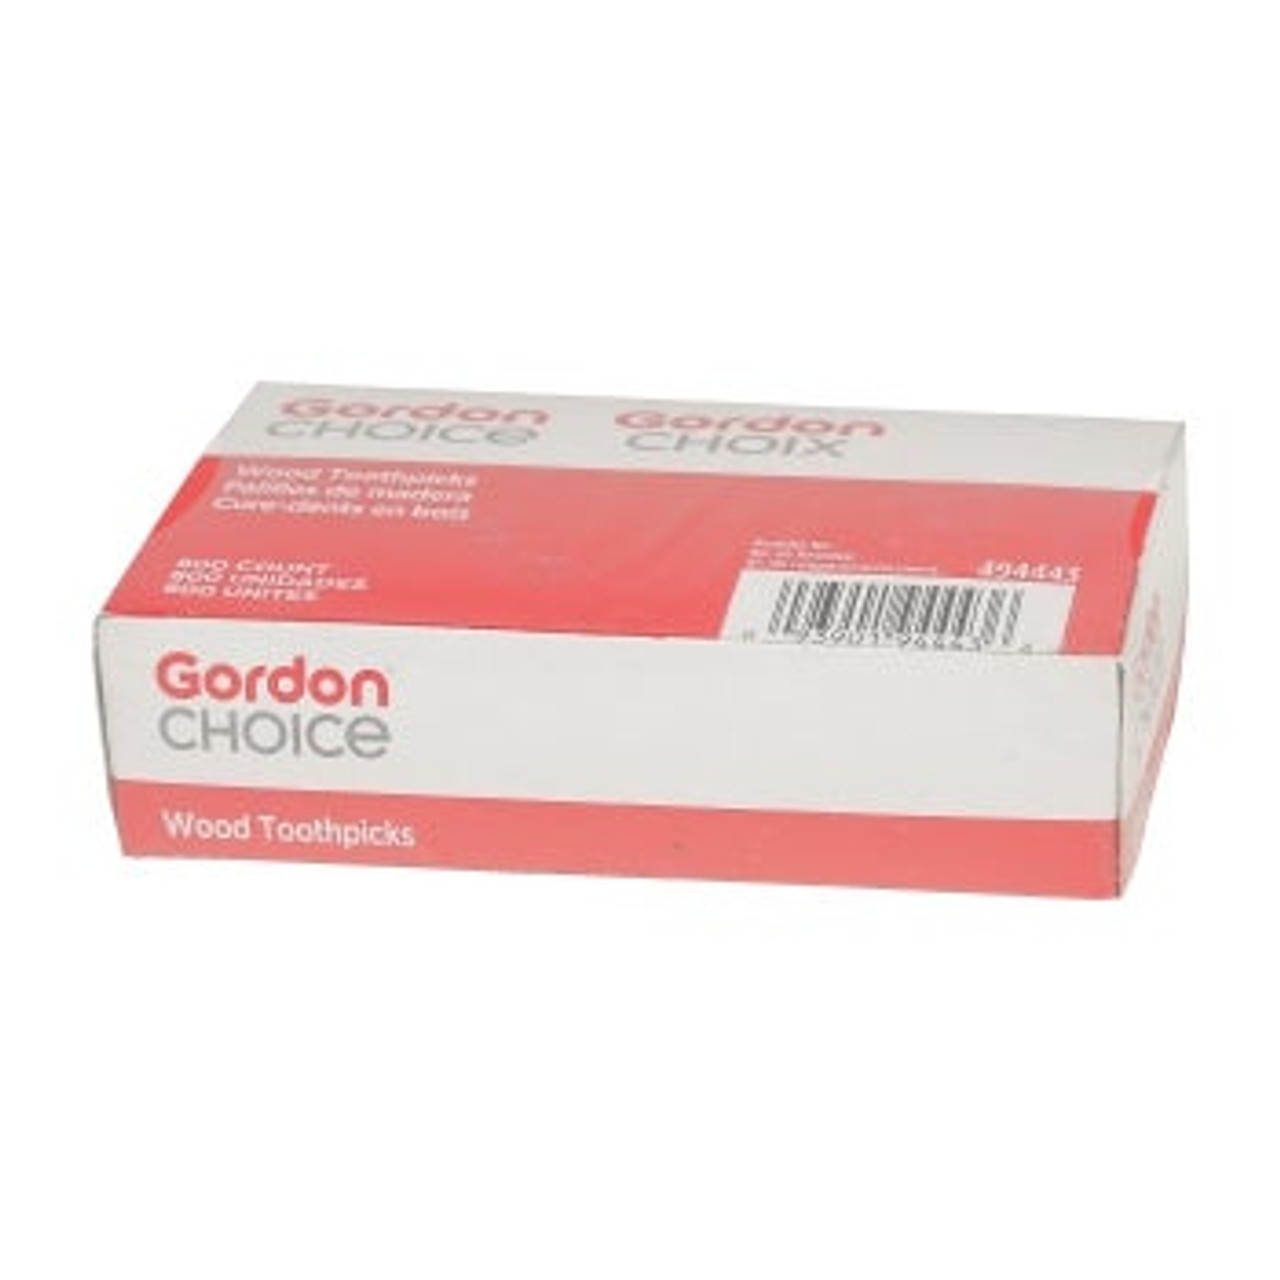 Gordon Choice 2.5in Round Toothpicks, 2.5In, Unwrapped | 800UN/Unit, 24 Units/Case